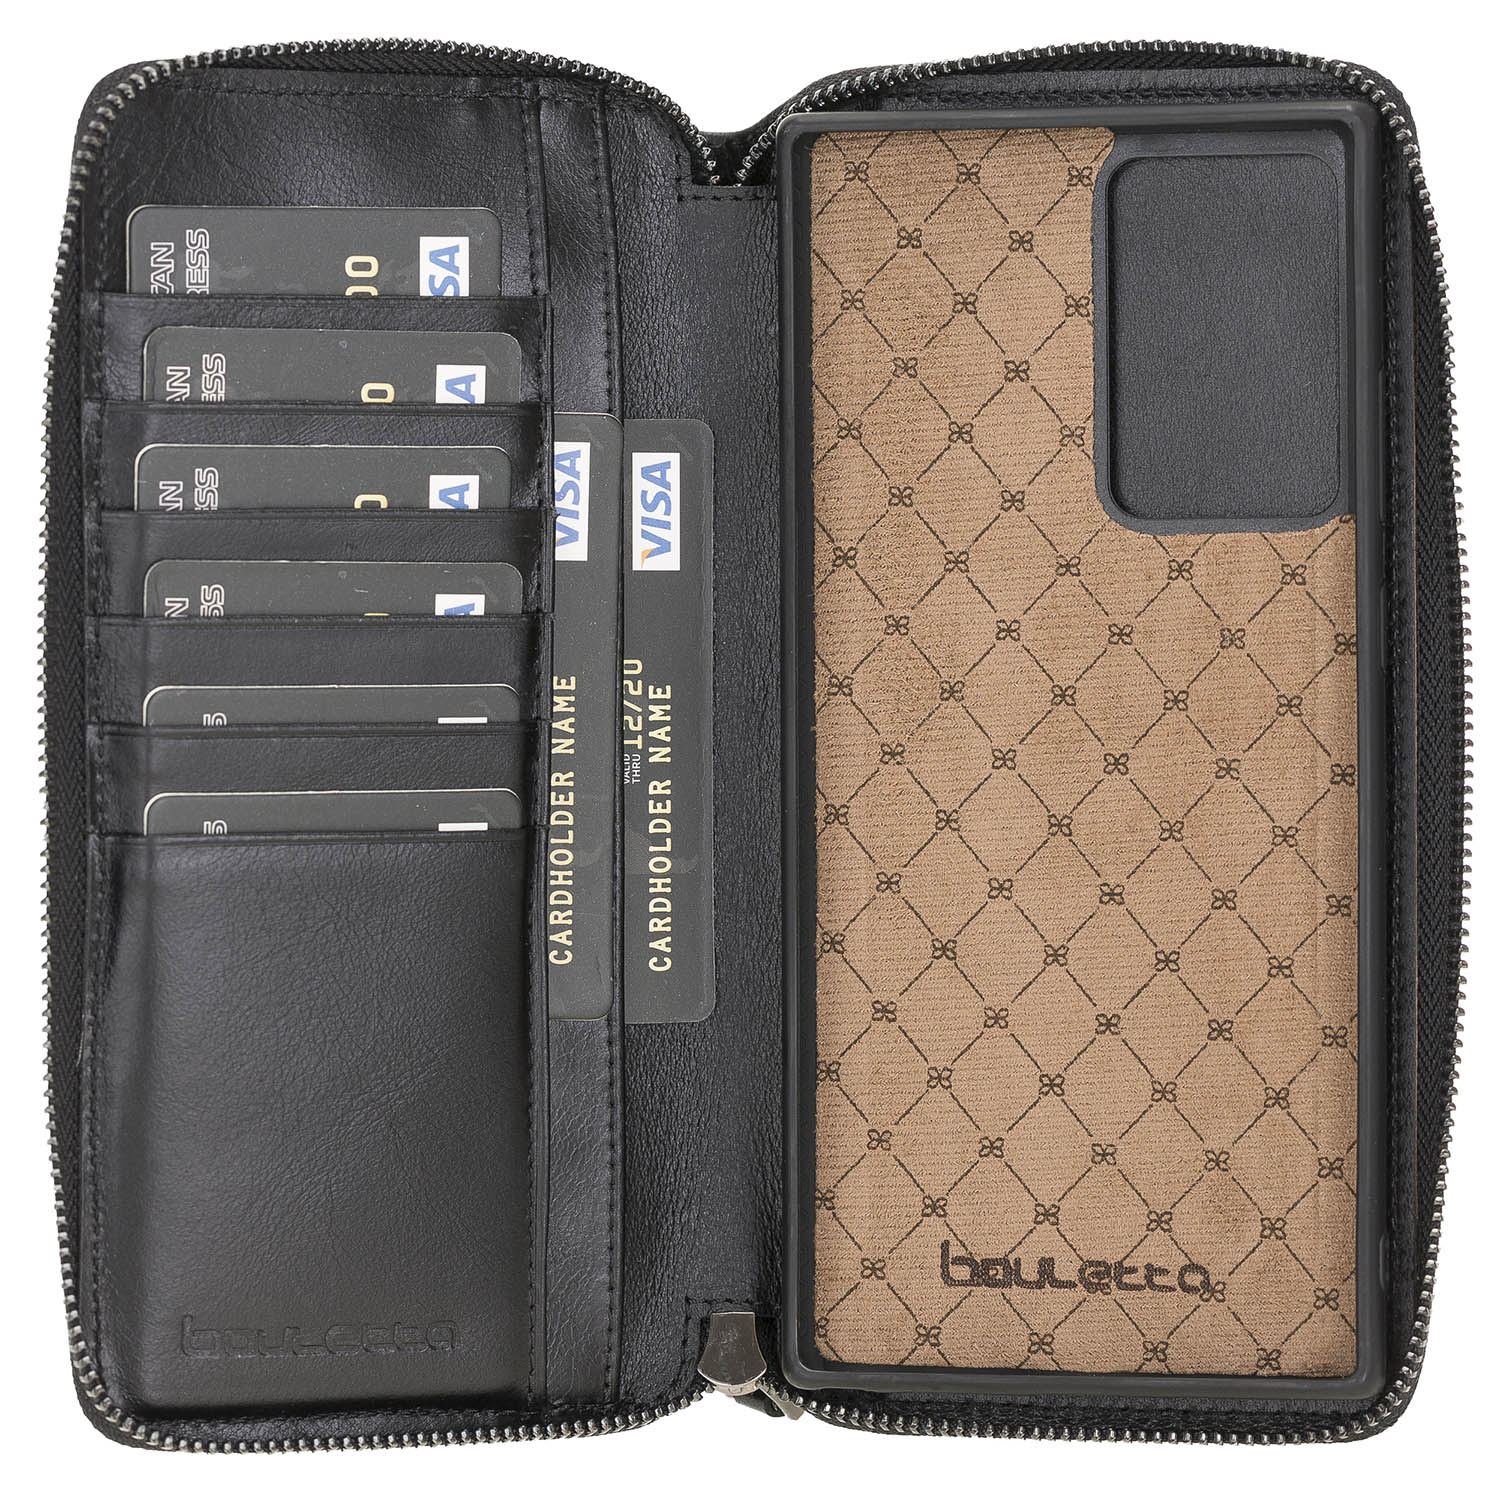 Galaxy Note 20 Ultra Case, Samsung Note 20 Wallet, Best Phone Case for Note  20 Ultra 5G / Note 20 5G, Full Grain Leather Wallet / BROWN 